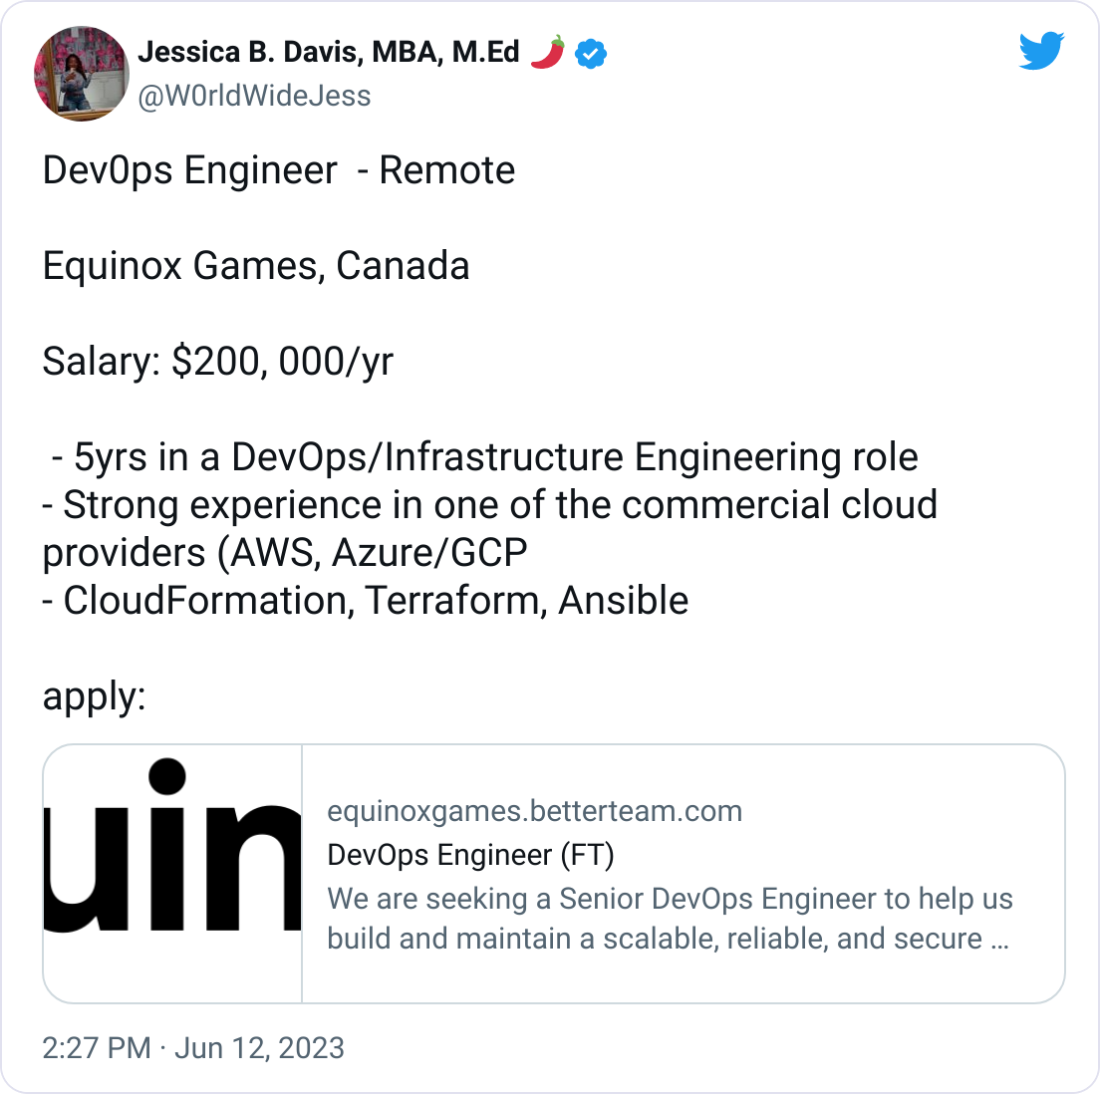 Jessica B. Davis, MBA, M.Ed 🌶 @W0rldWideJess Dev0ps Engineer  - Remote   Equinox Games, Canada  Salary: $200, 000/yr   - 5yrs in a DevOps/Infrastructure Engineering role - Strong experience in one of the commercial cloud providers (AWS, Azure/GCP - CloudFormation, Terraform, Ansible